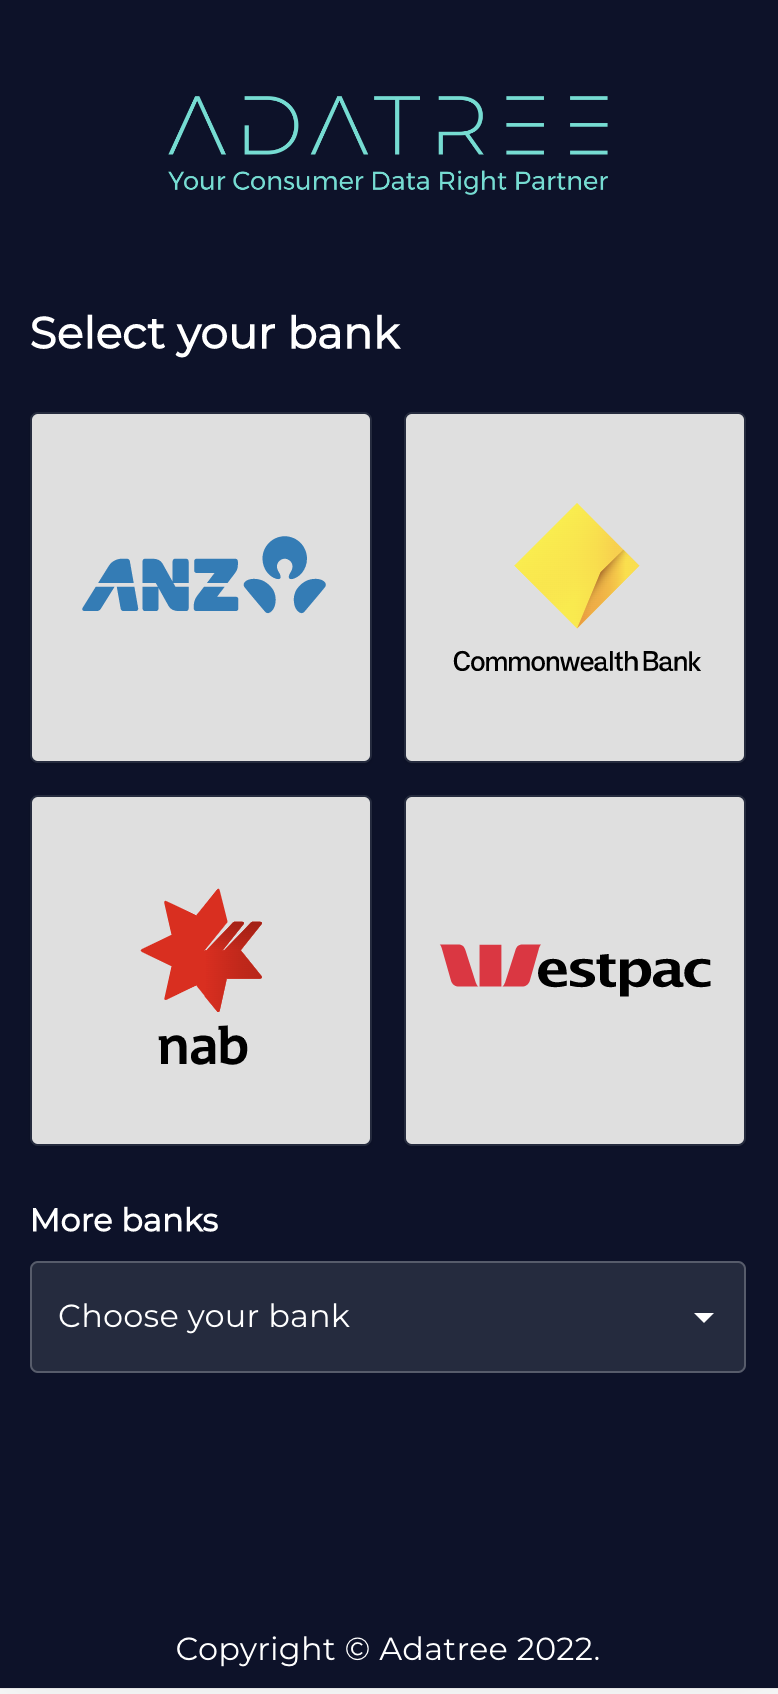 Consent dashboard – choose your bank